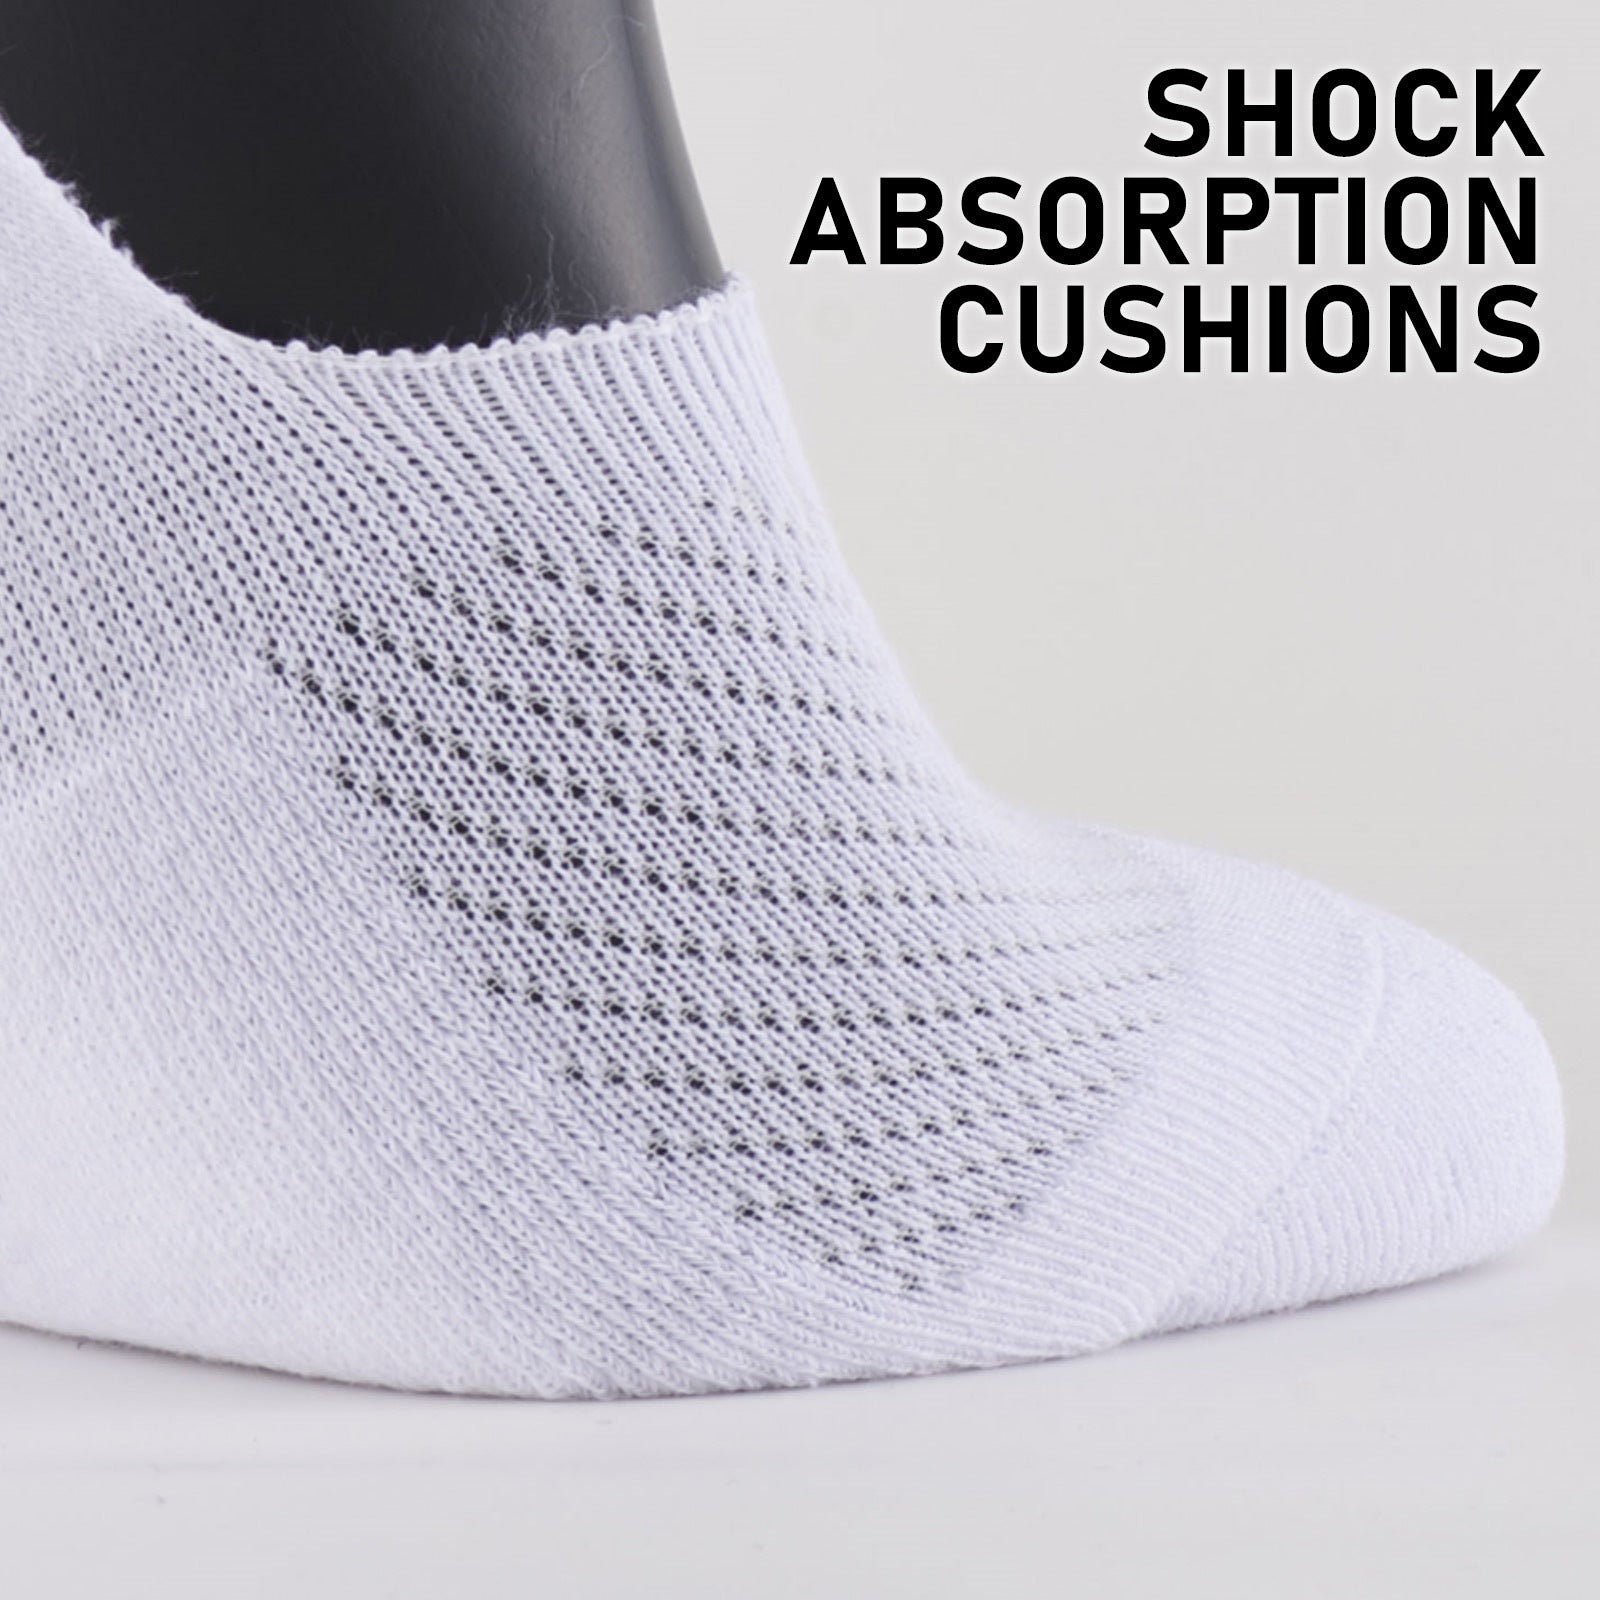 Rexy 3 Pack Small White Cushion No Show Ankle Socks Non-Slip Breathable from Deals499 at Deals499